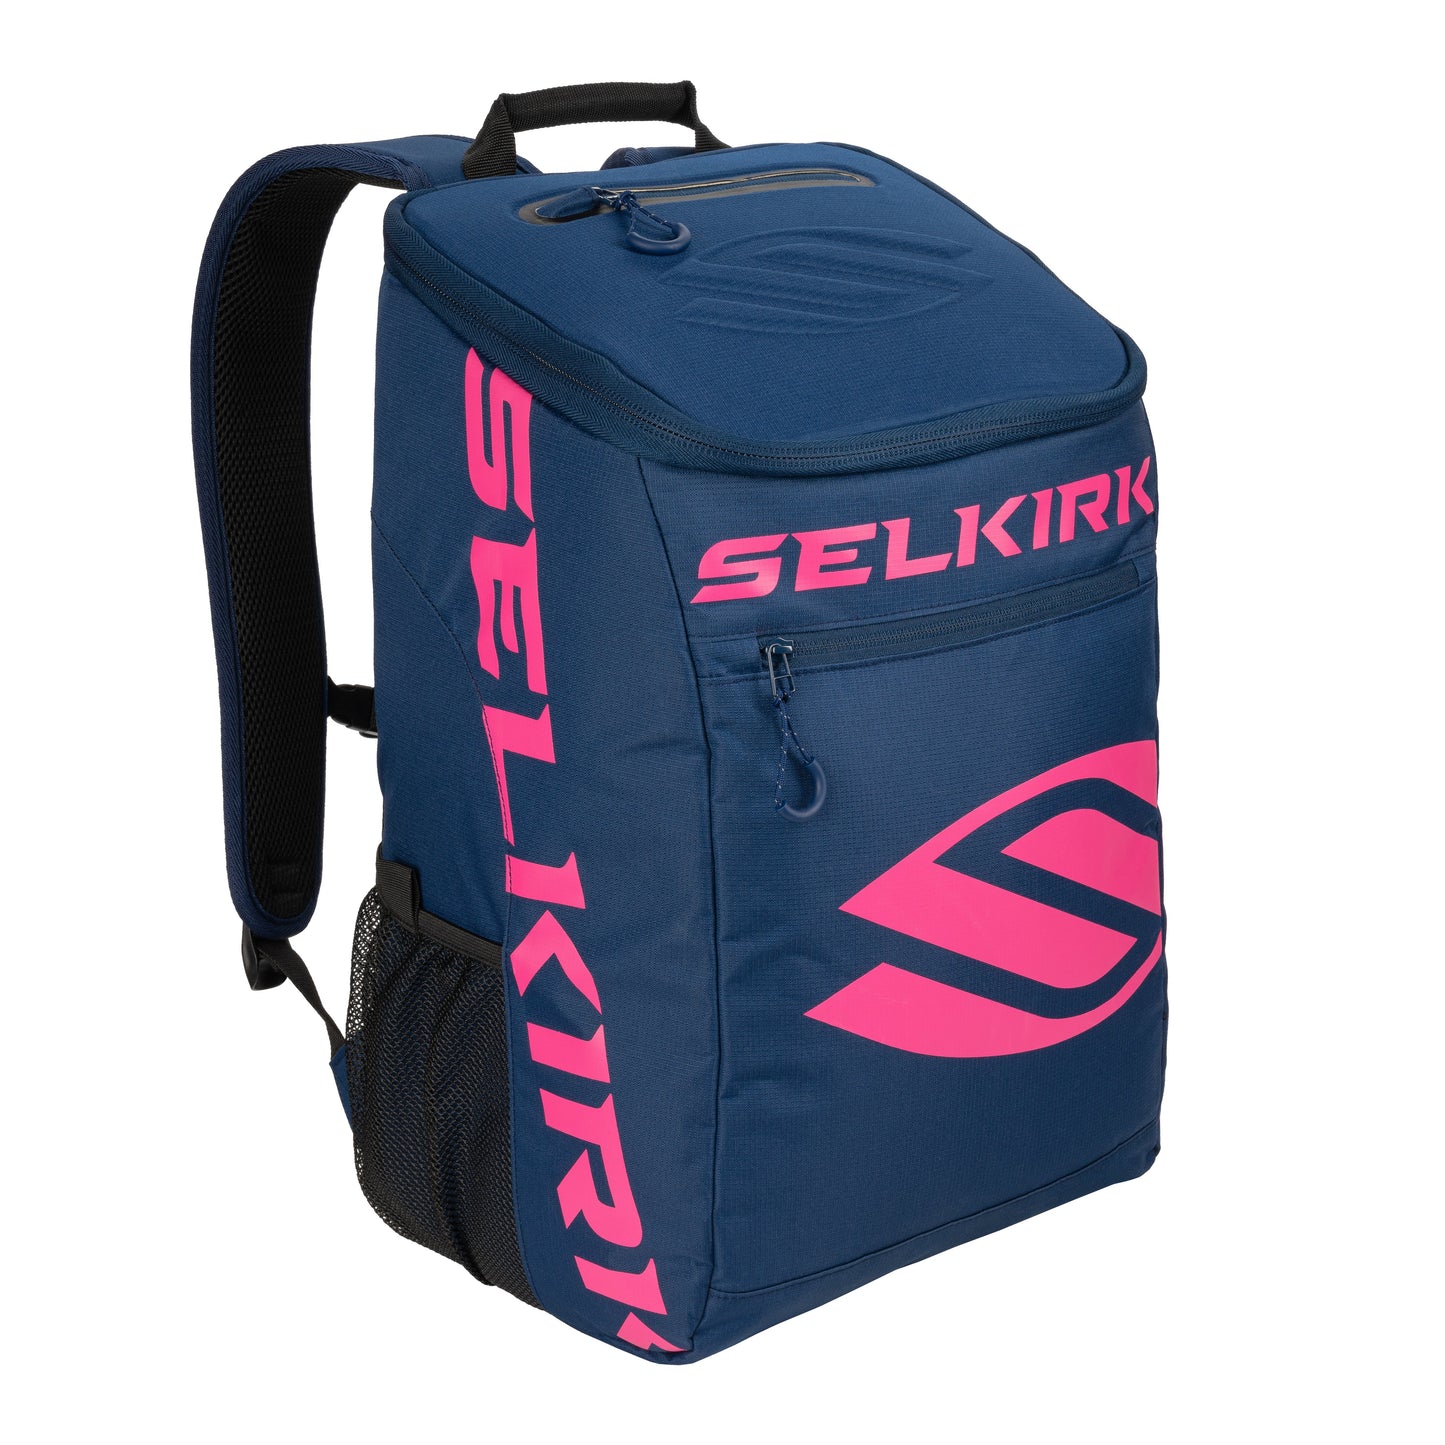 A Selkirk Core Series Team Backpack Pickleball Bag with the word sekiro on it.